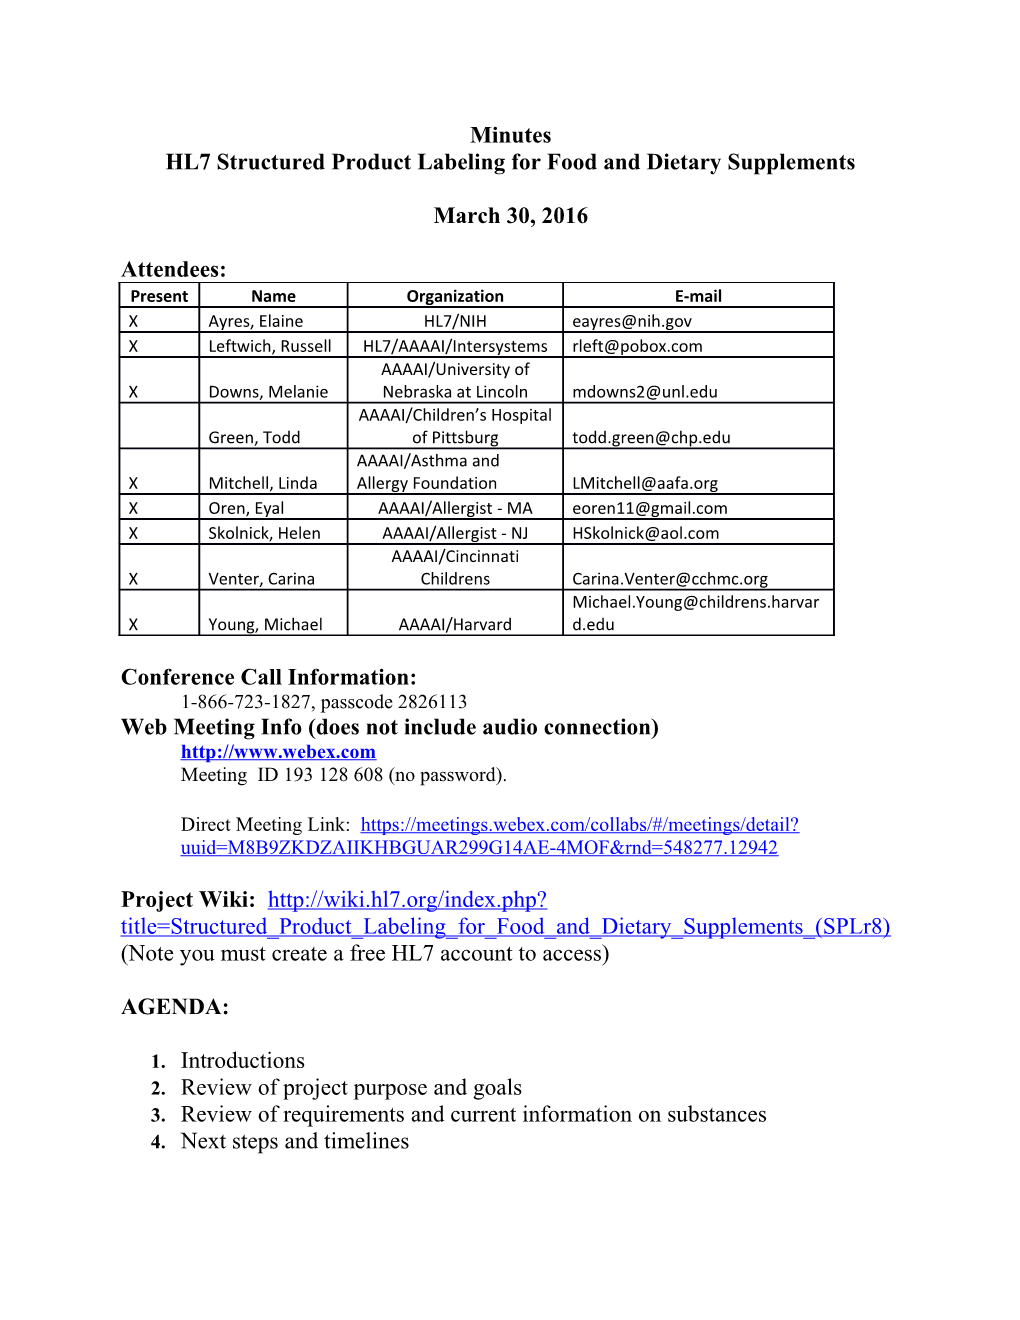 HL7 Structured Product Labeling for Food and Dietary Supplements